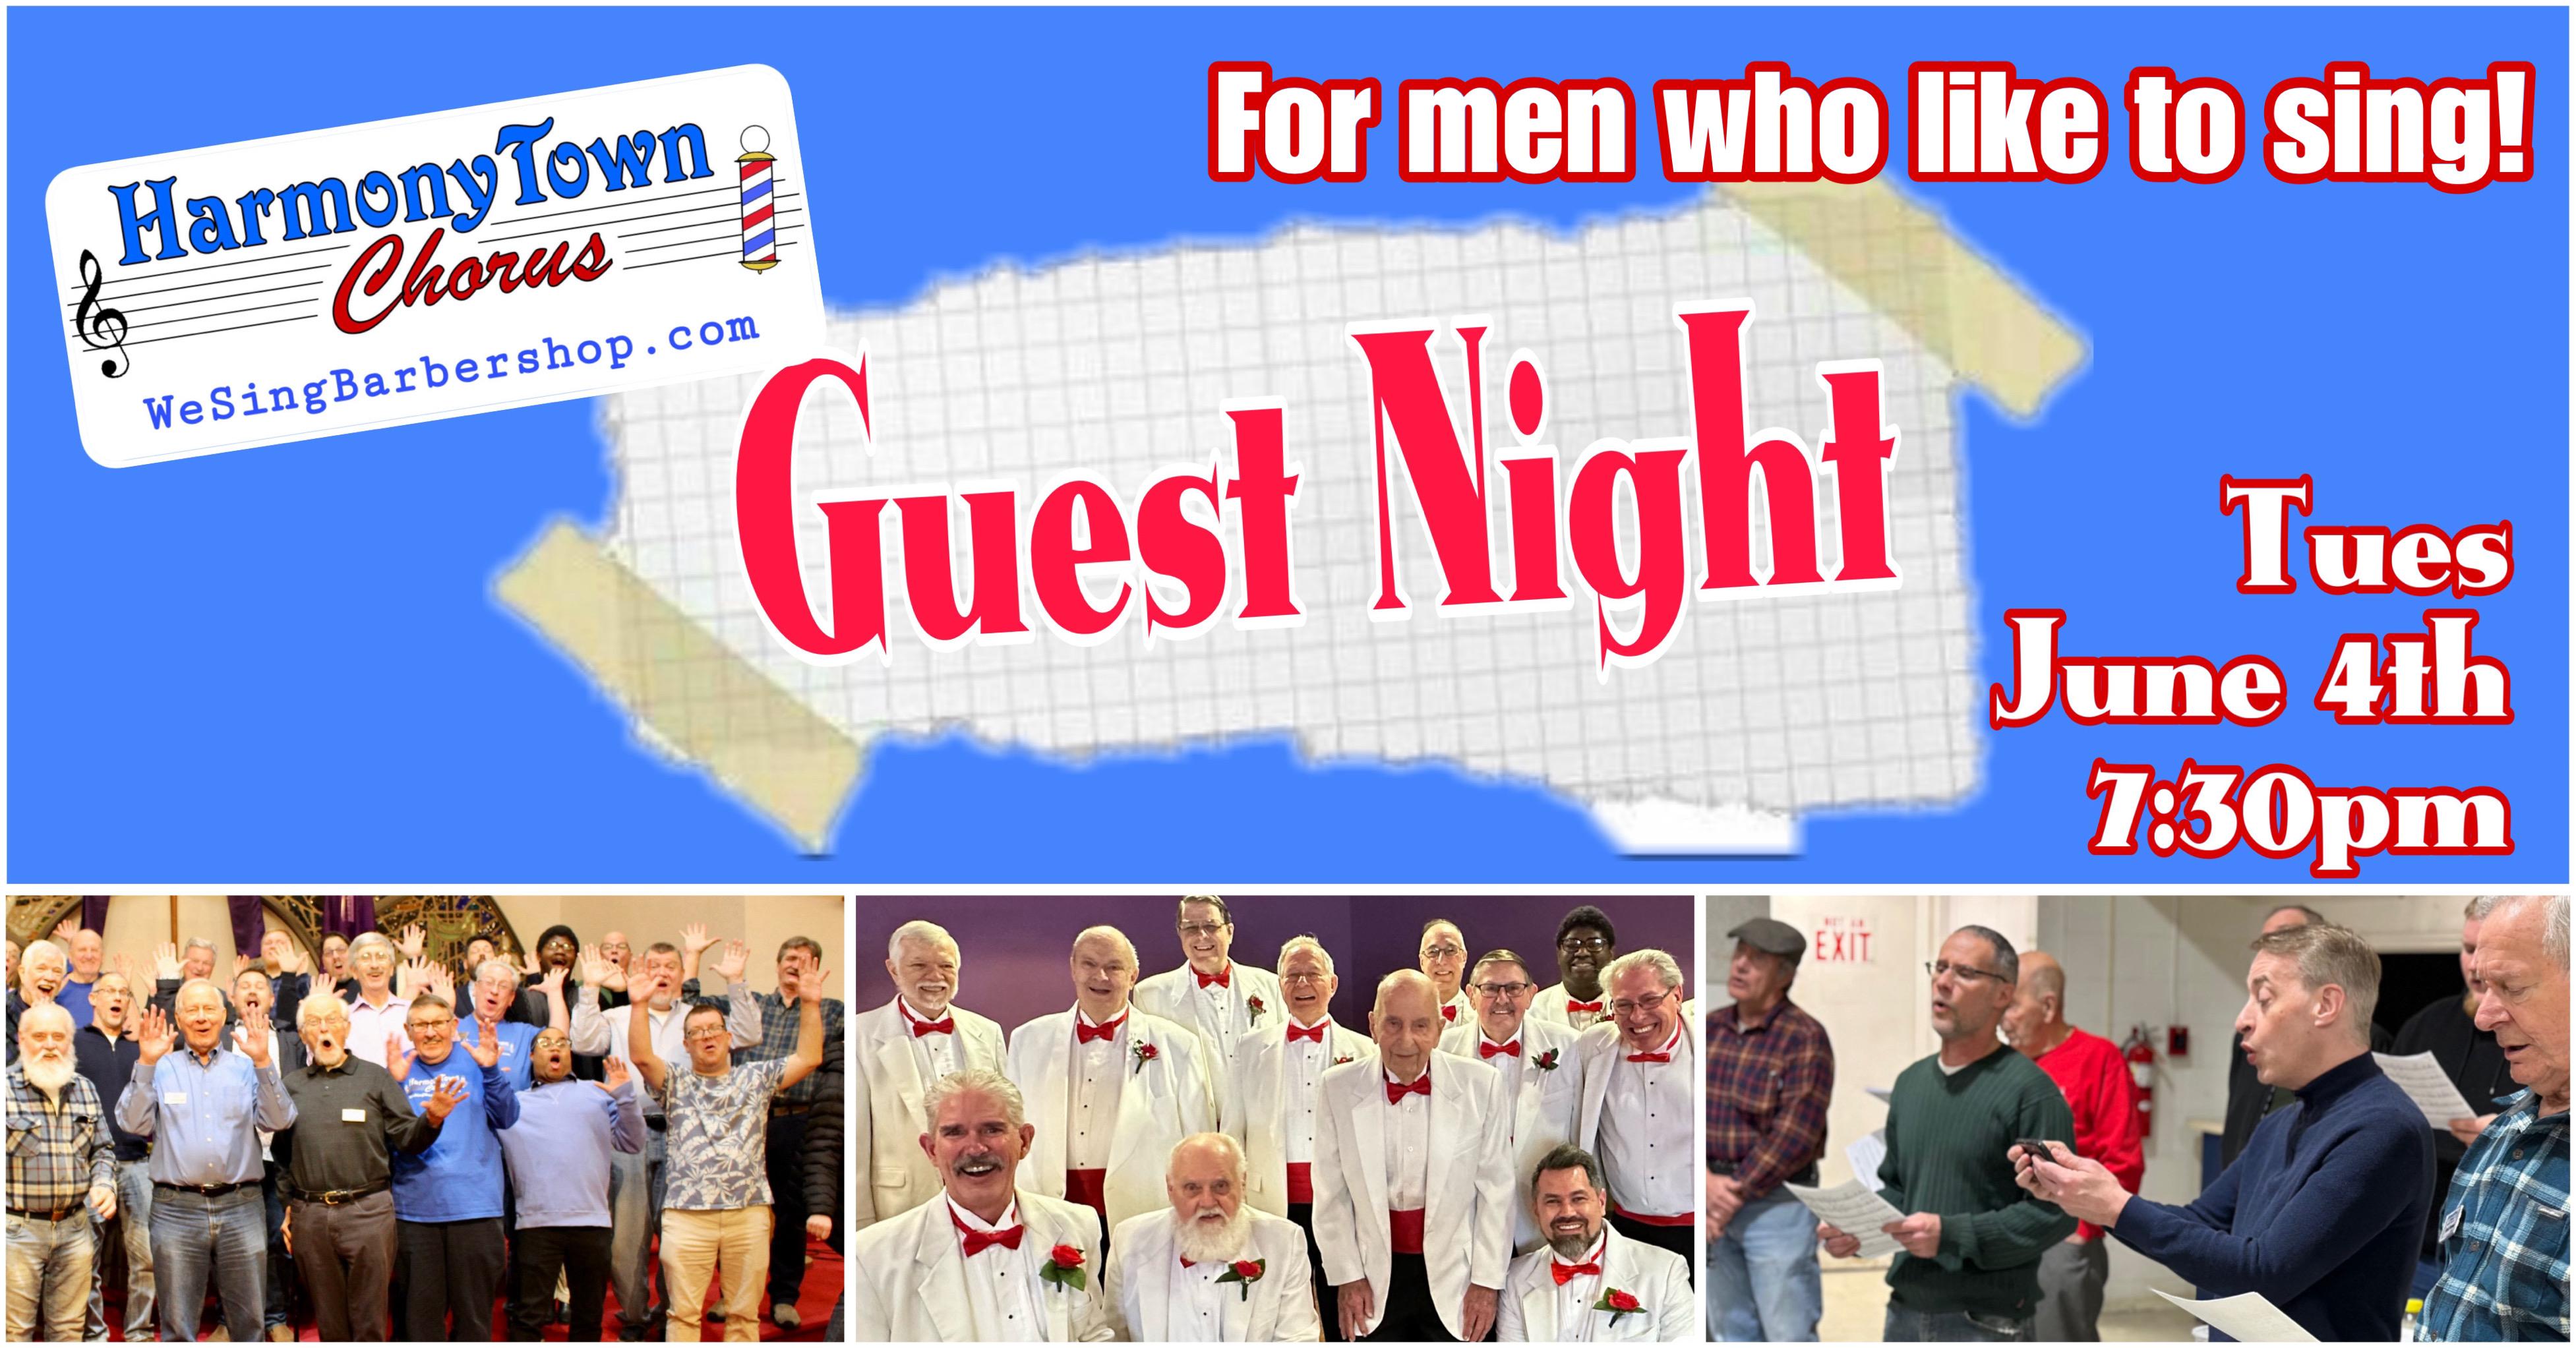 Guest Night - Come SING with us!